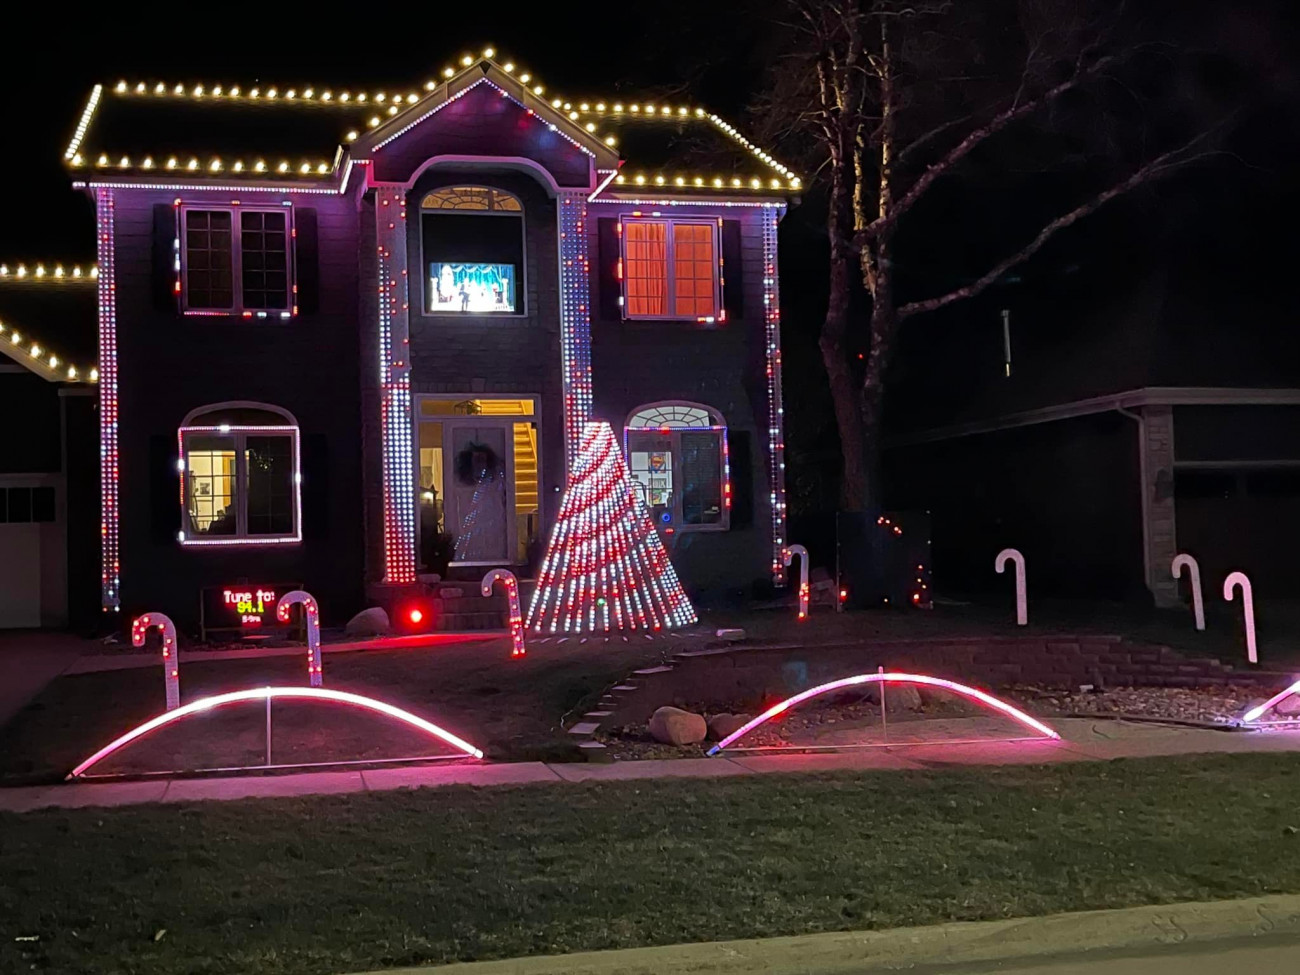 2-story home with Christmas lights, synced to music